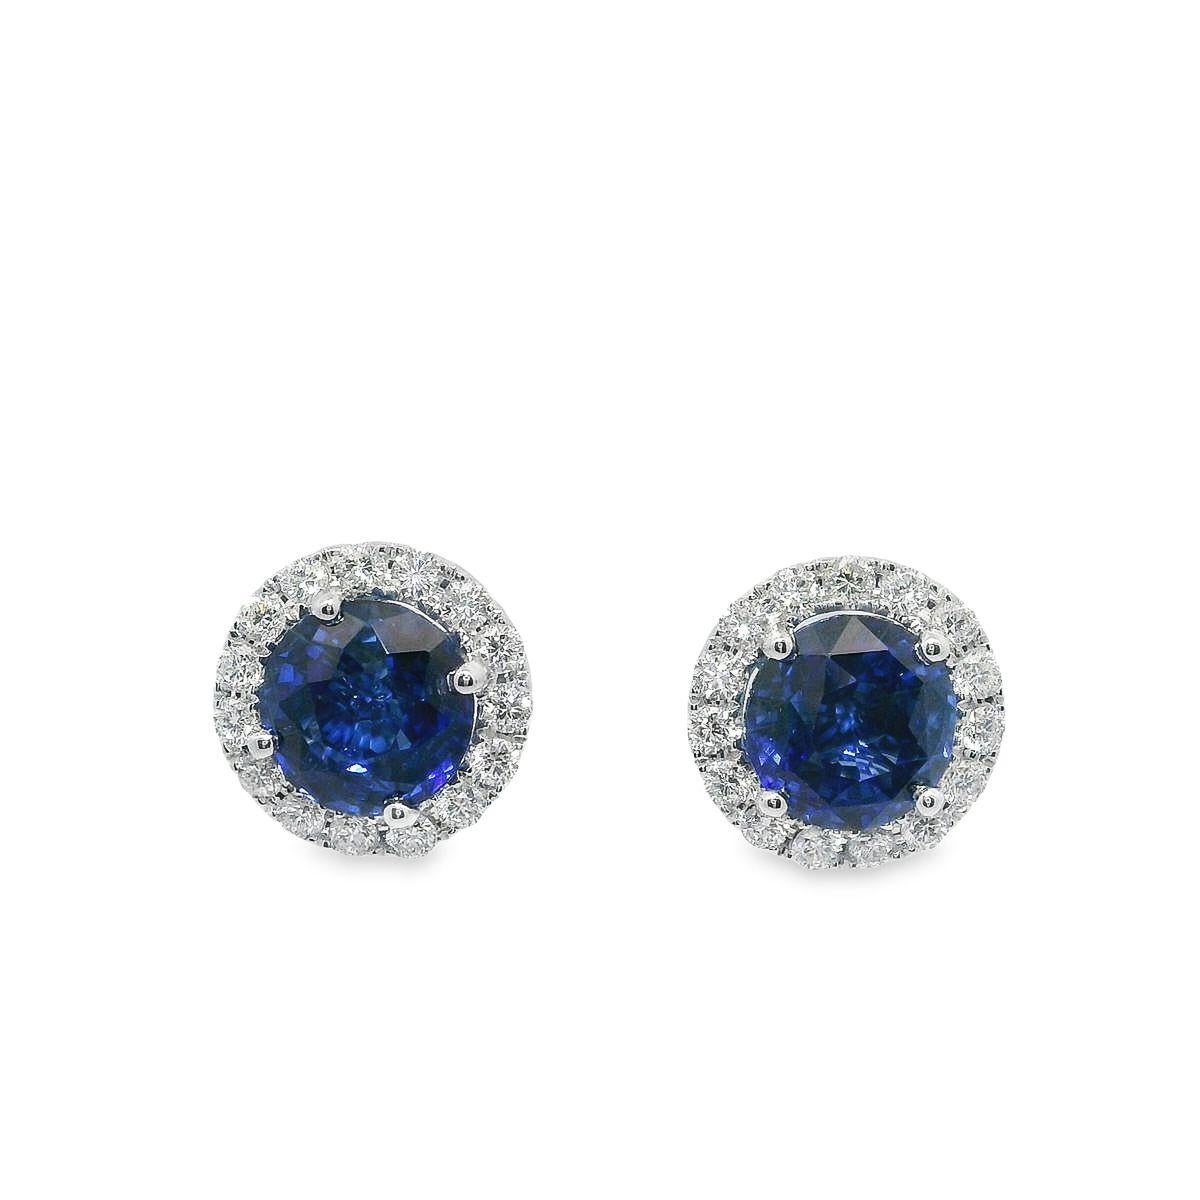 --Stone(s):--
(2) Natural Genuine Sapphires - Prong Set - Vivid Royal Blue Color - 5.12ctw (exact) Exceptional color, cut, and match!
** See Report Details Below for Complete Info on the Sapphires **
(30) Natural Genuine Diamonds - Round Brilliant